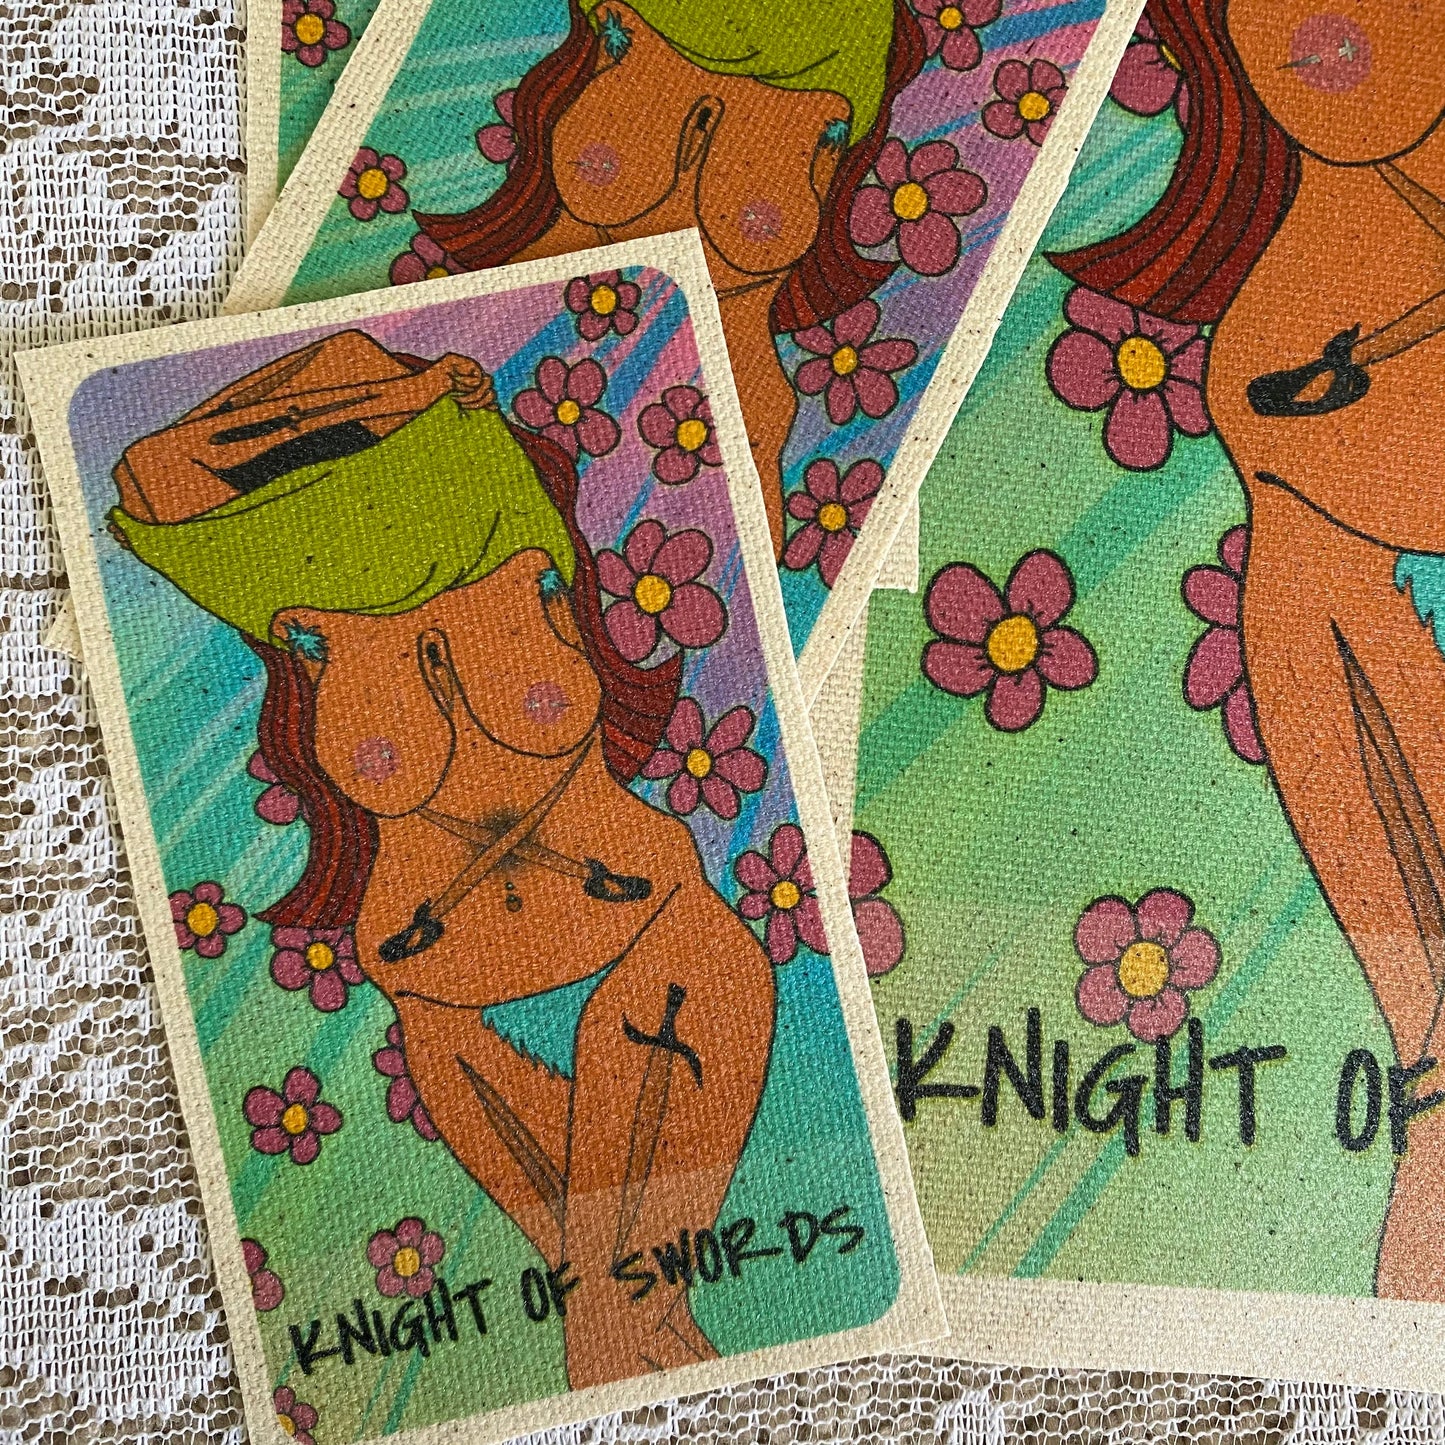 Knight of Swords Canvas Patch